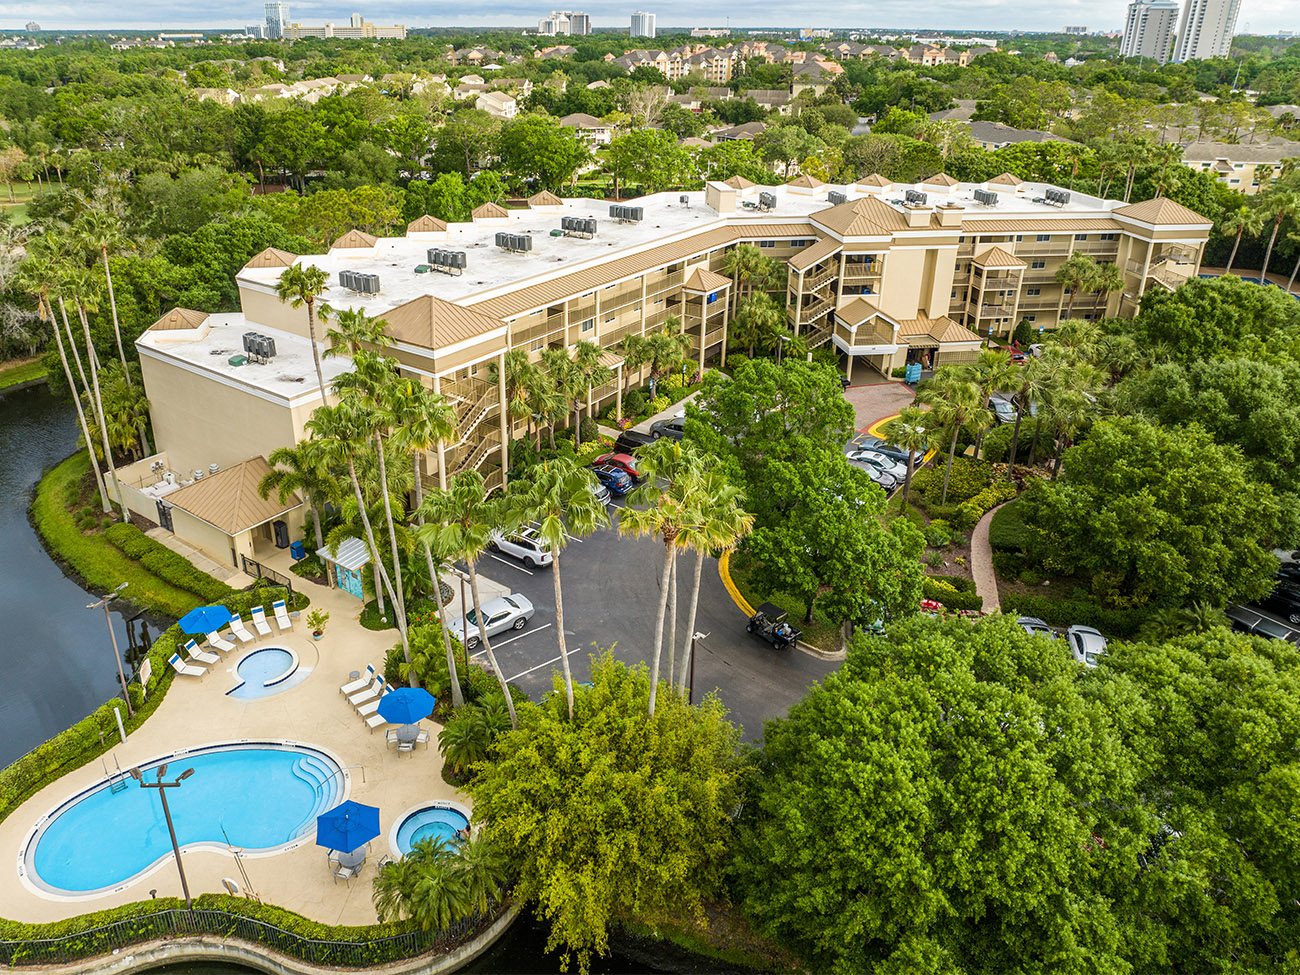 Image of Marriott's Imperial Palms in Orlando.